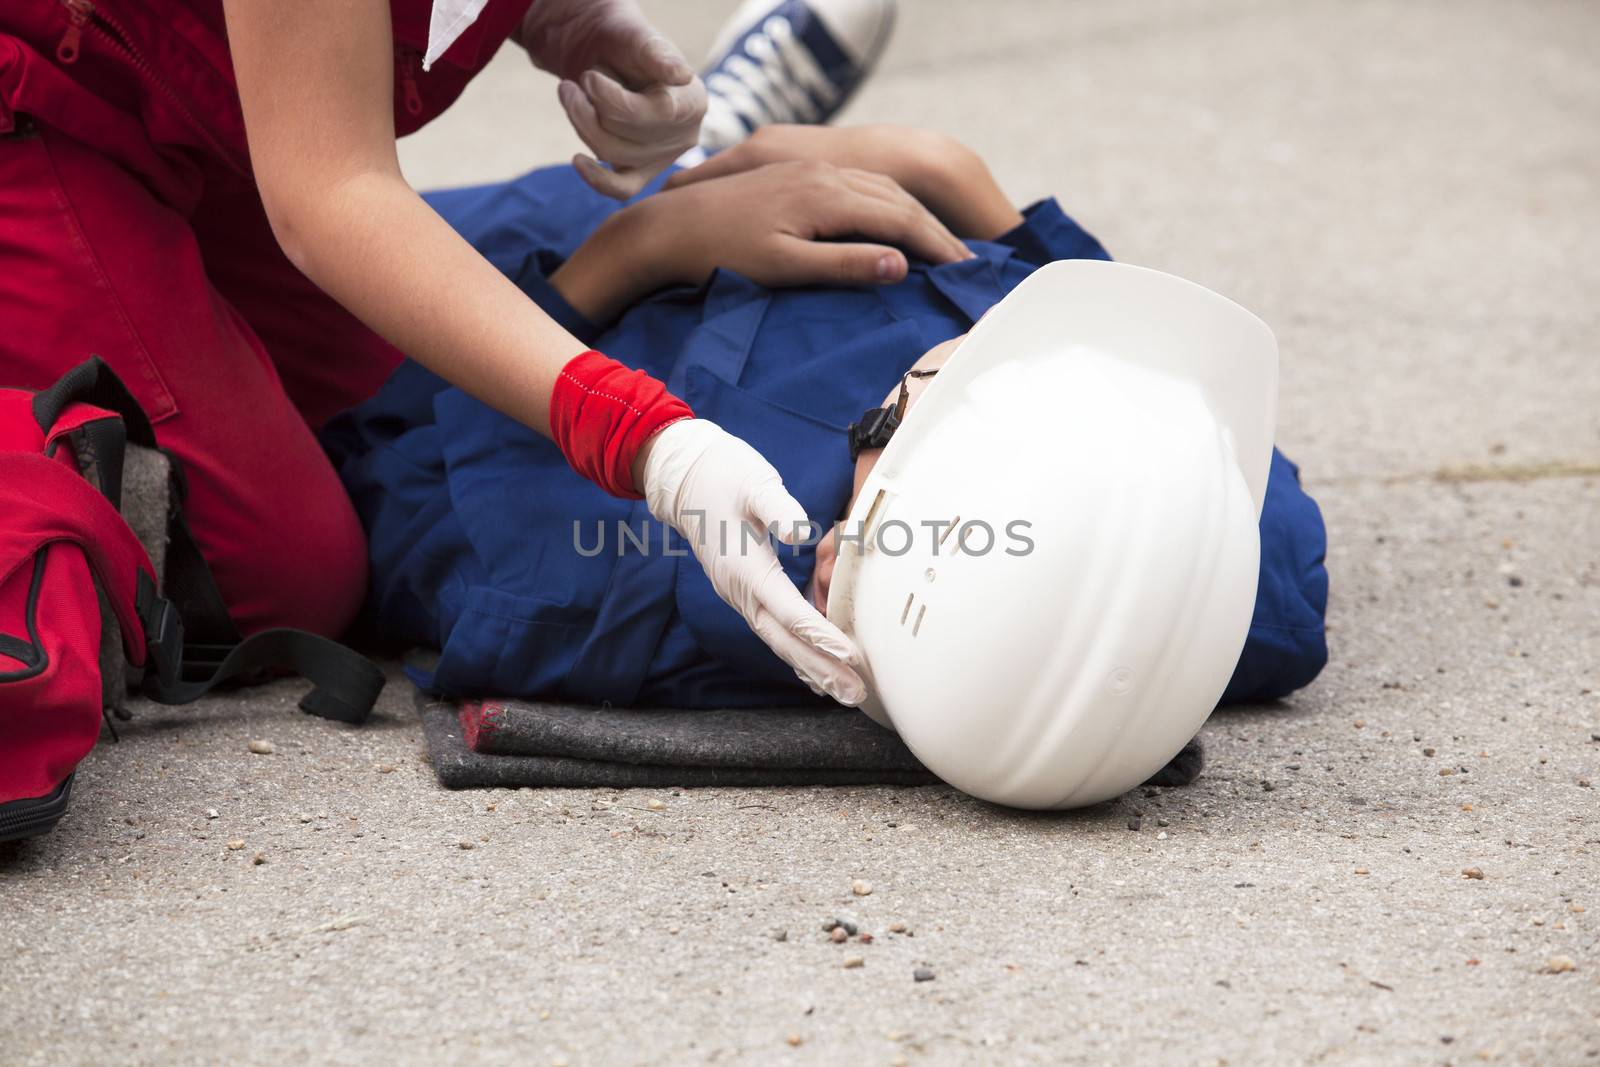 First aid exam by wellphoto